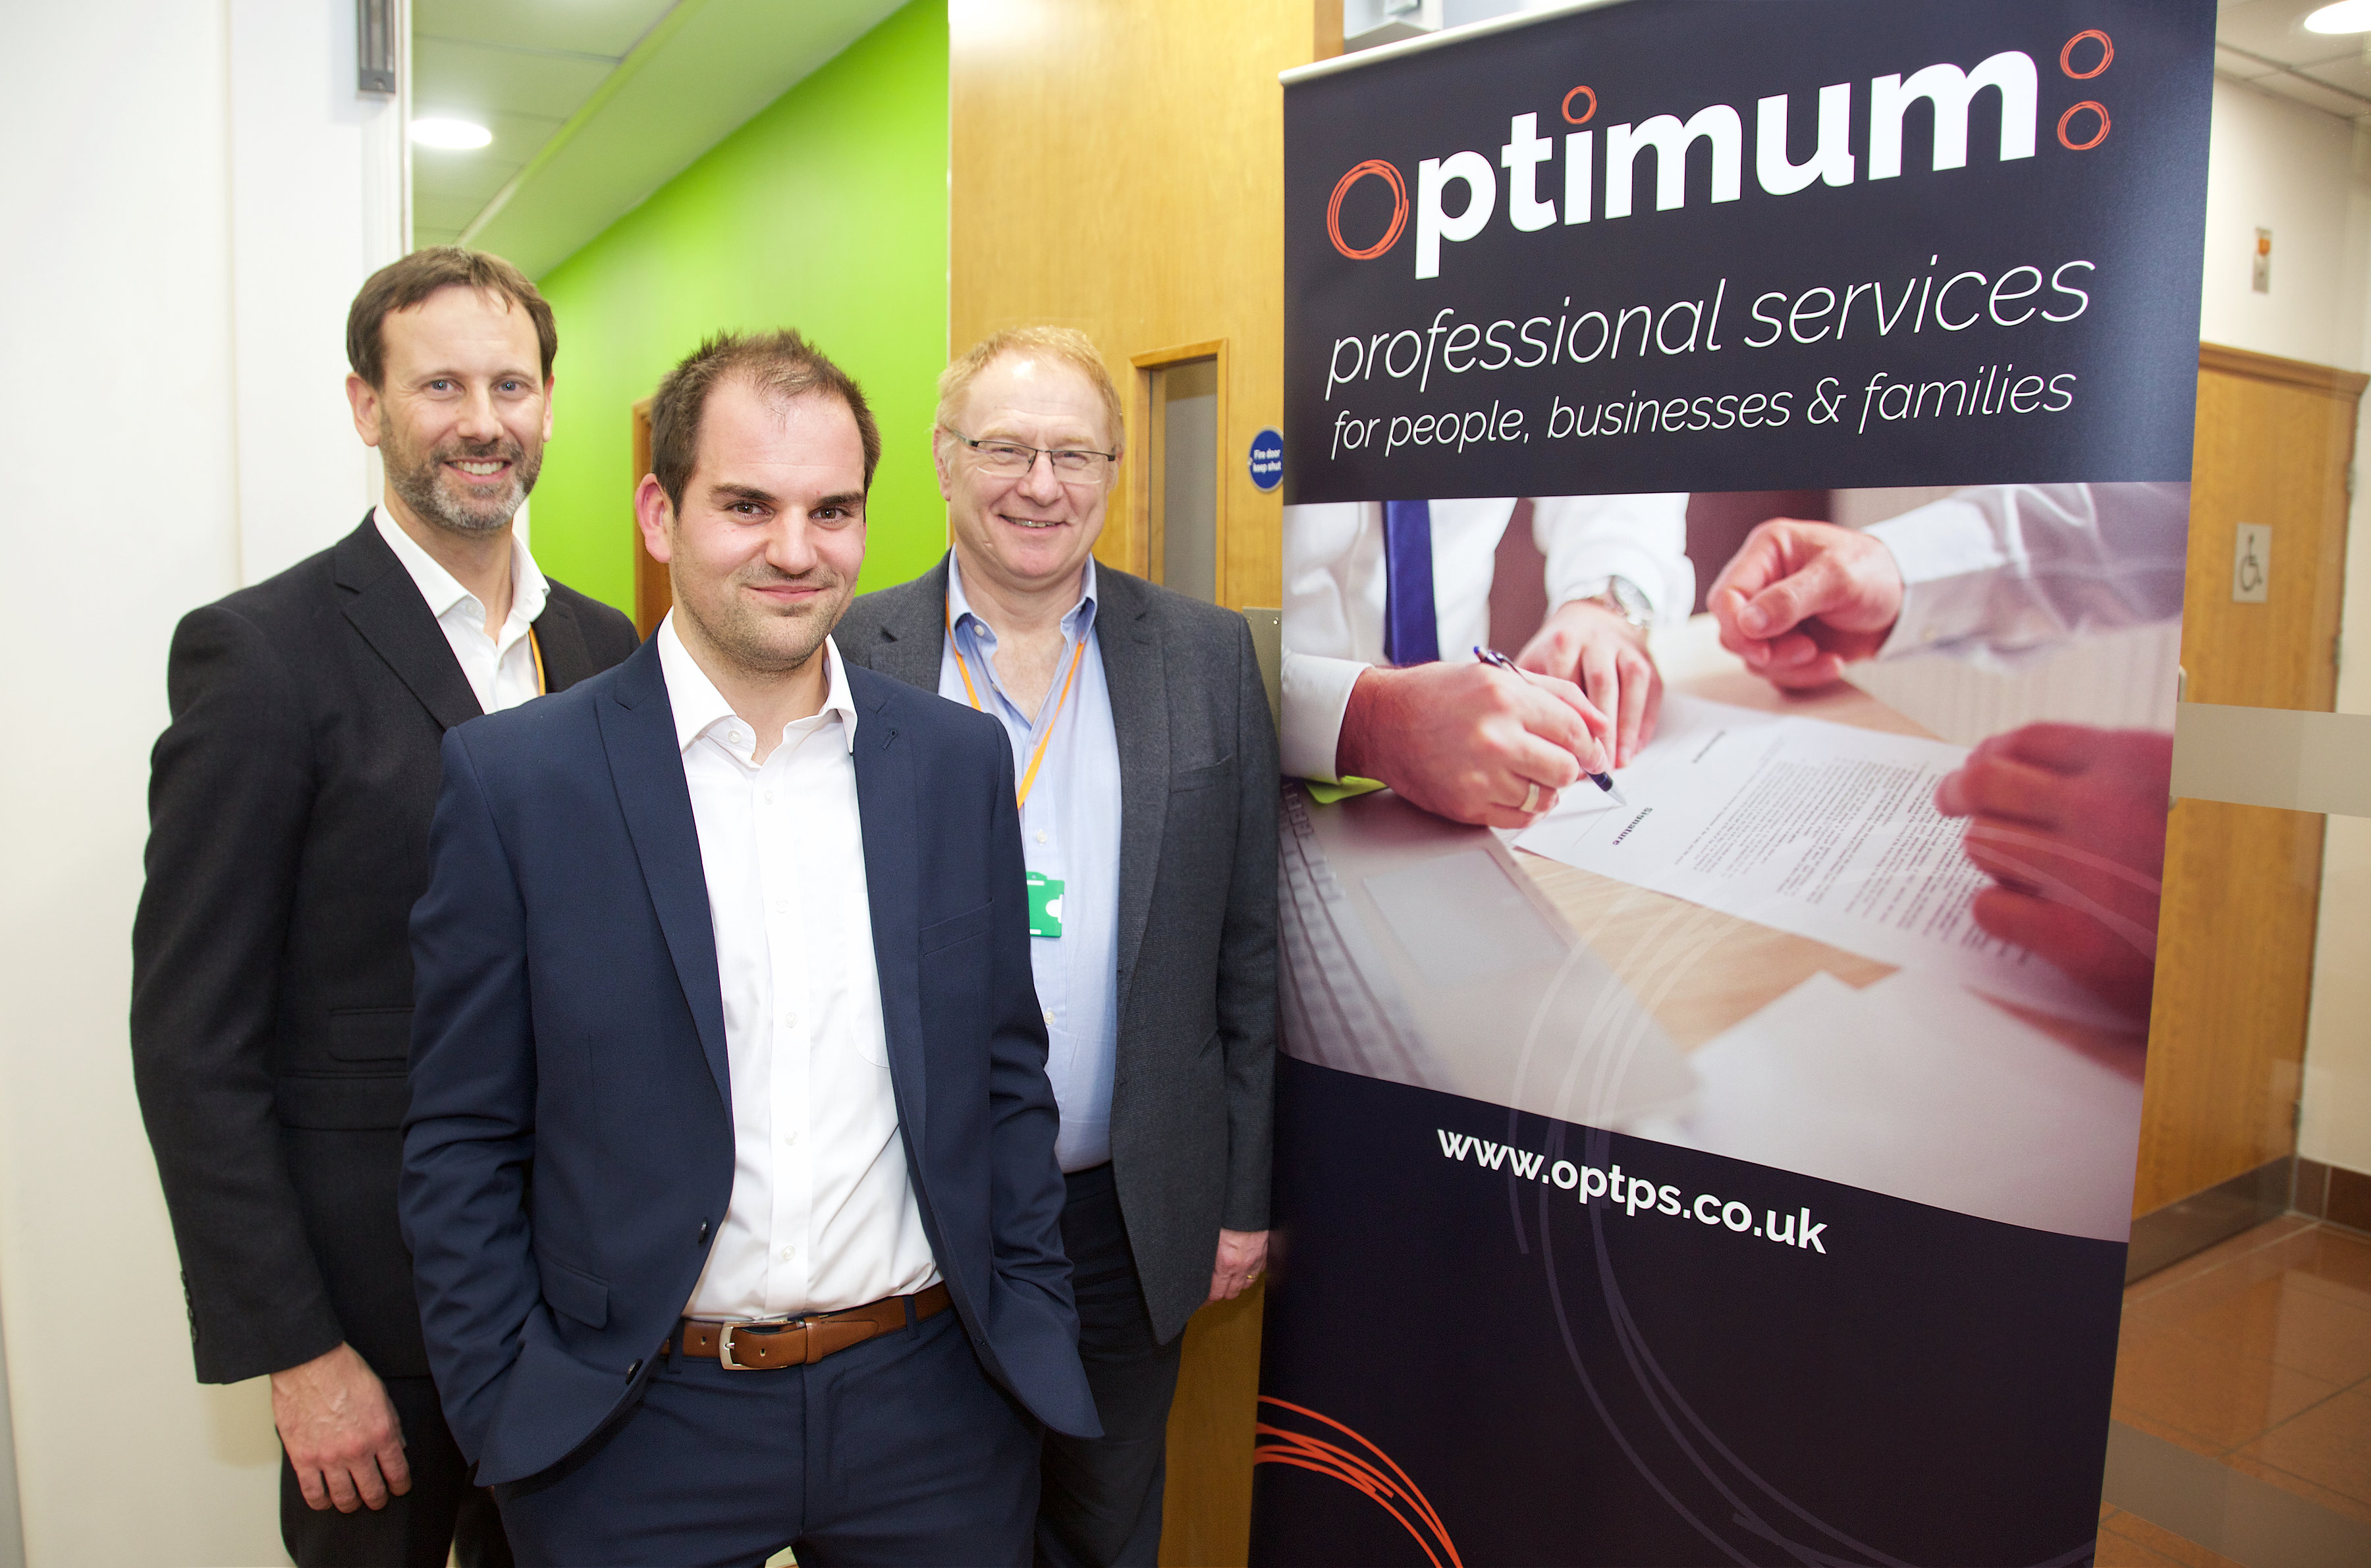 Trio of appointments puts Optimum Professional Services on course for further growth